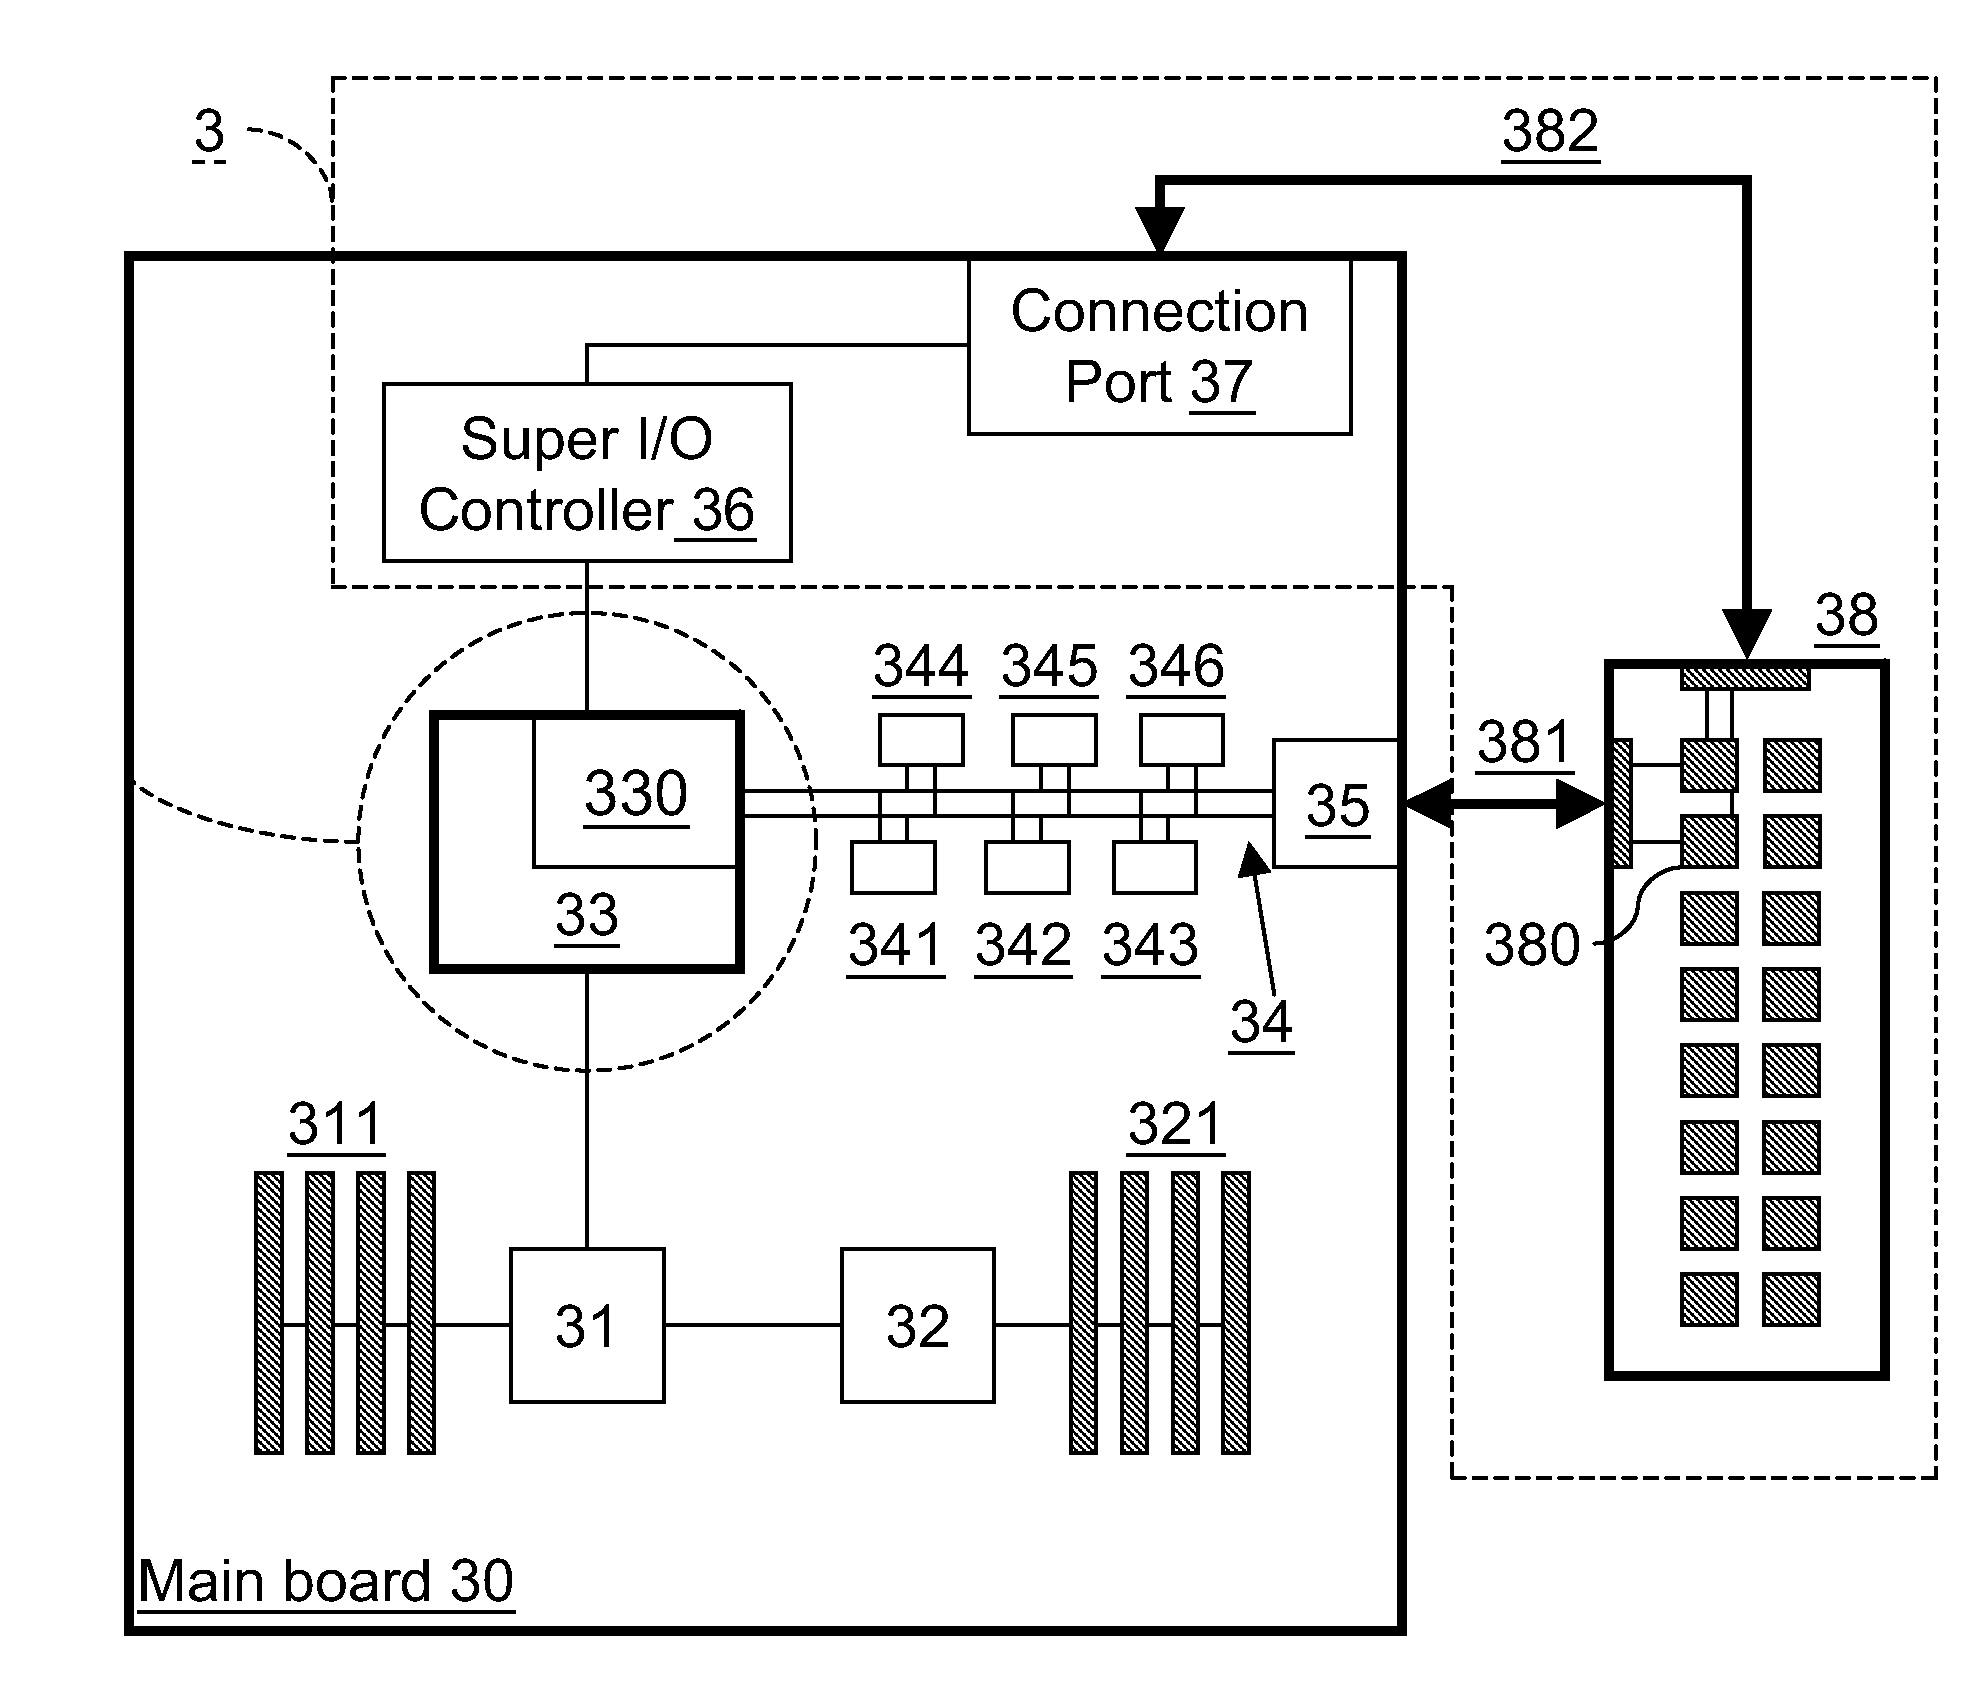 Apparatus and method for scanning slave addresses of smbus slave devices